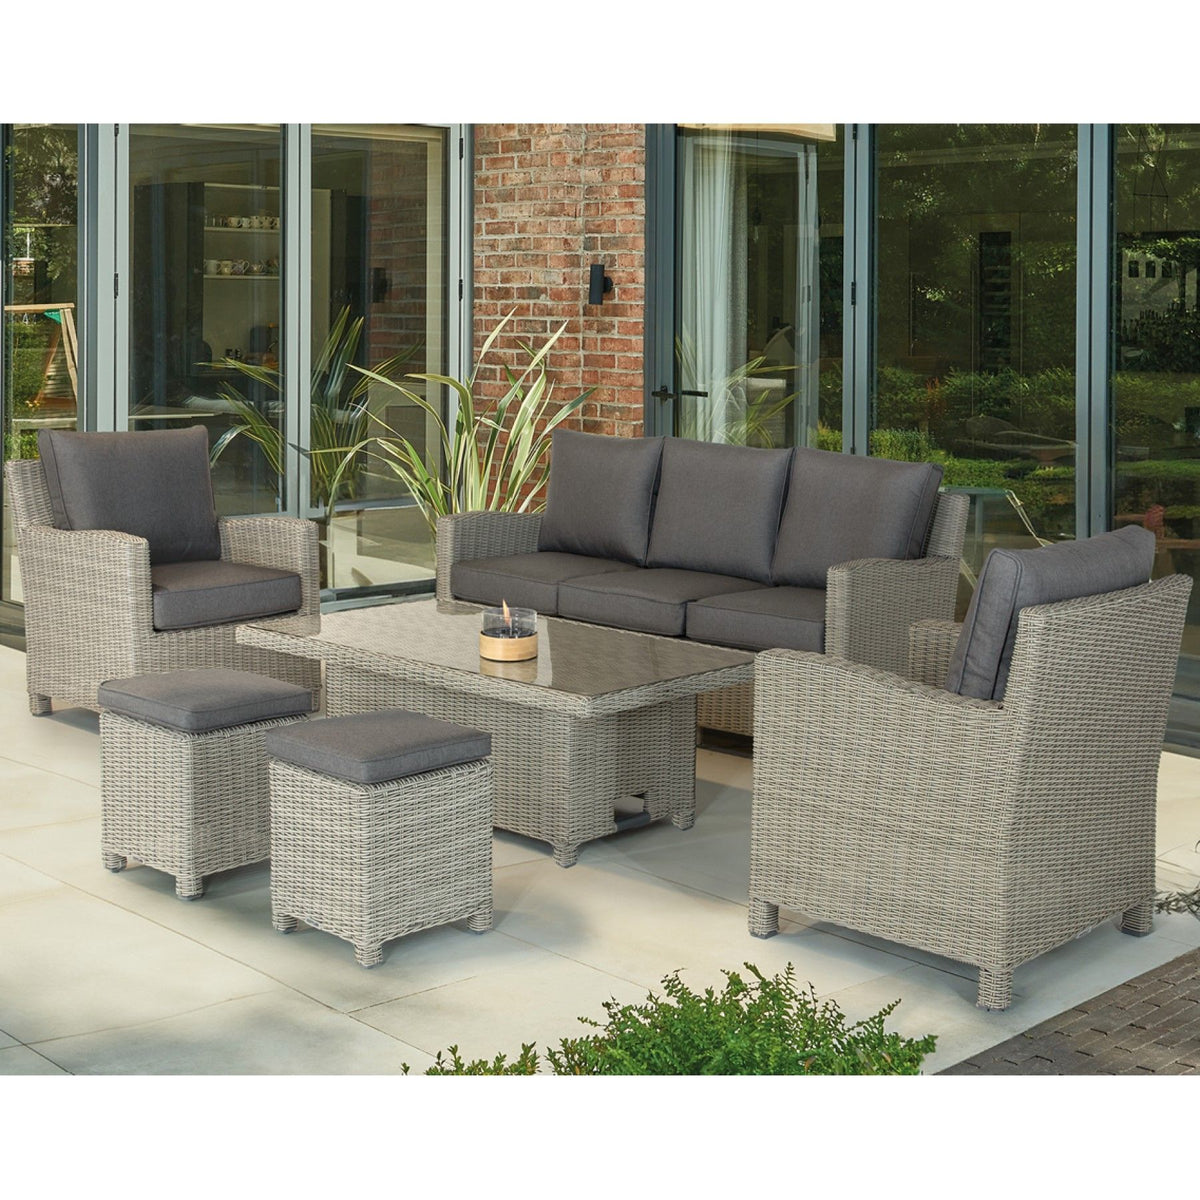 Kettler Palma Signature White Wash Wicker Lounge Sofa Set with High Low Glass Top Table